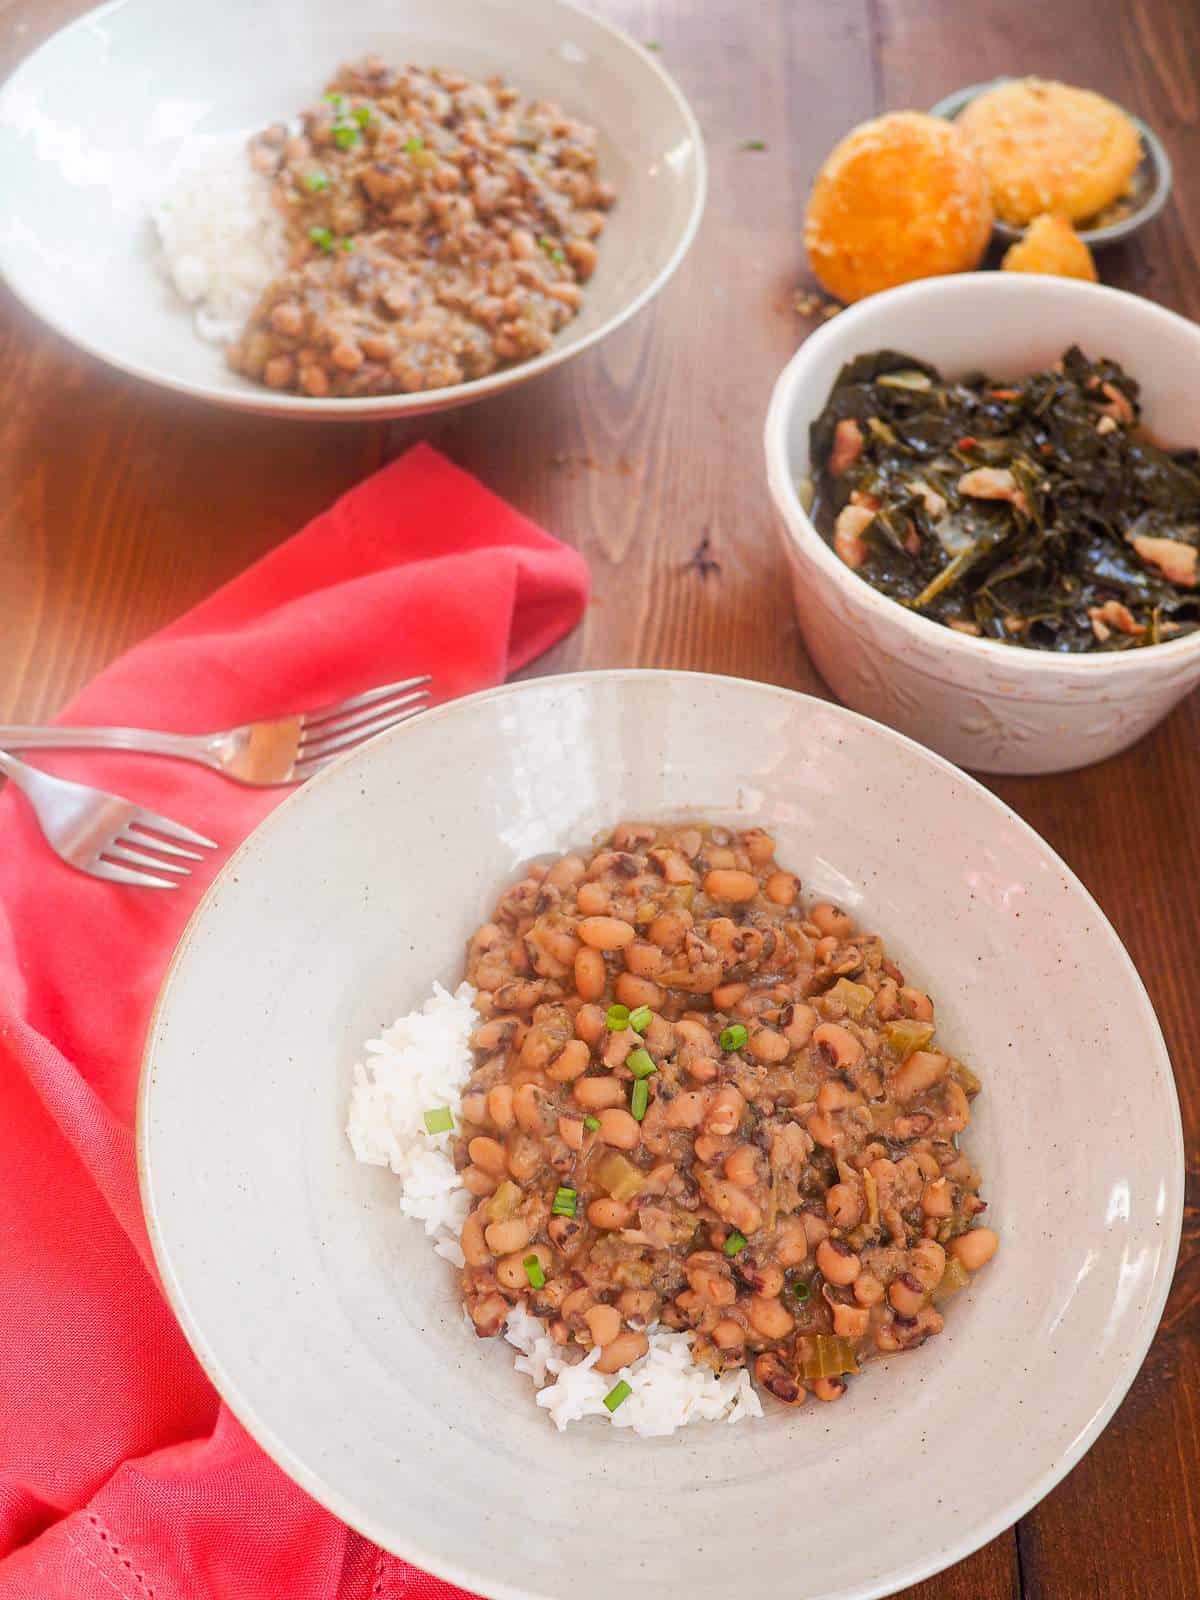 Two bowls of hoppin john black eyed peas with a bowl of collard greens and some corn muffins.